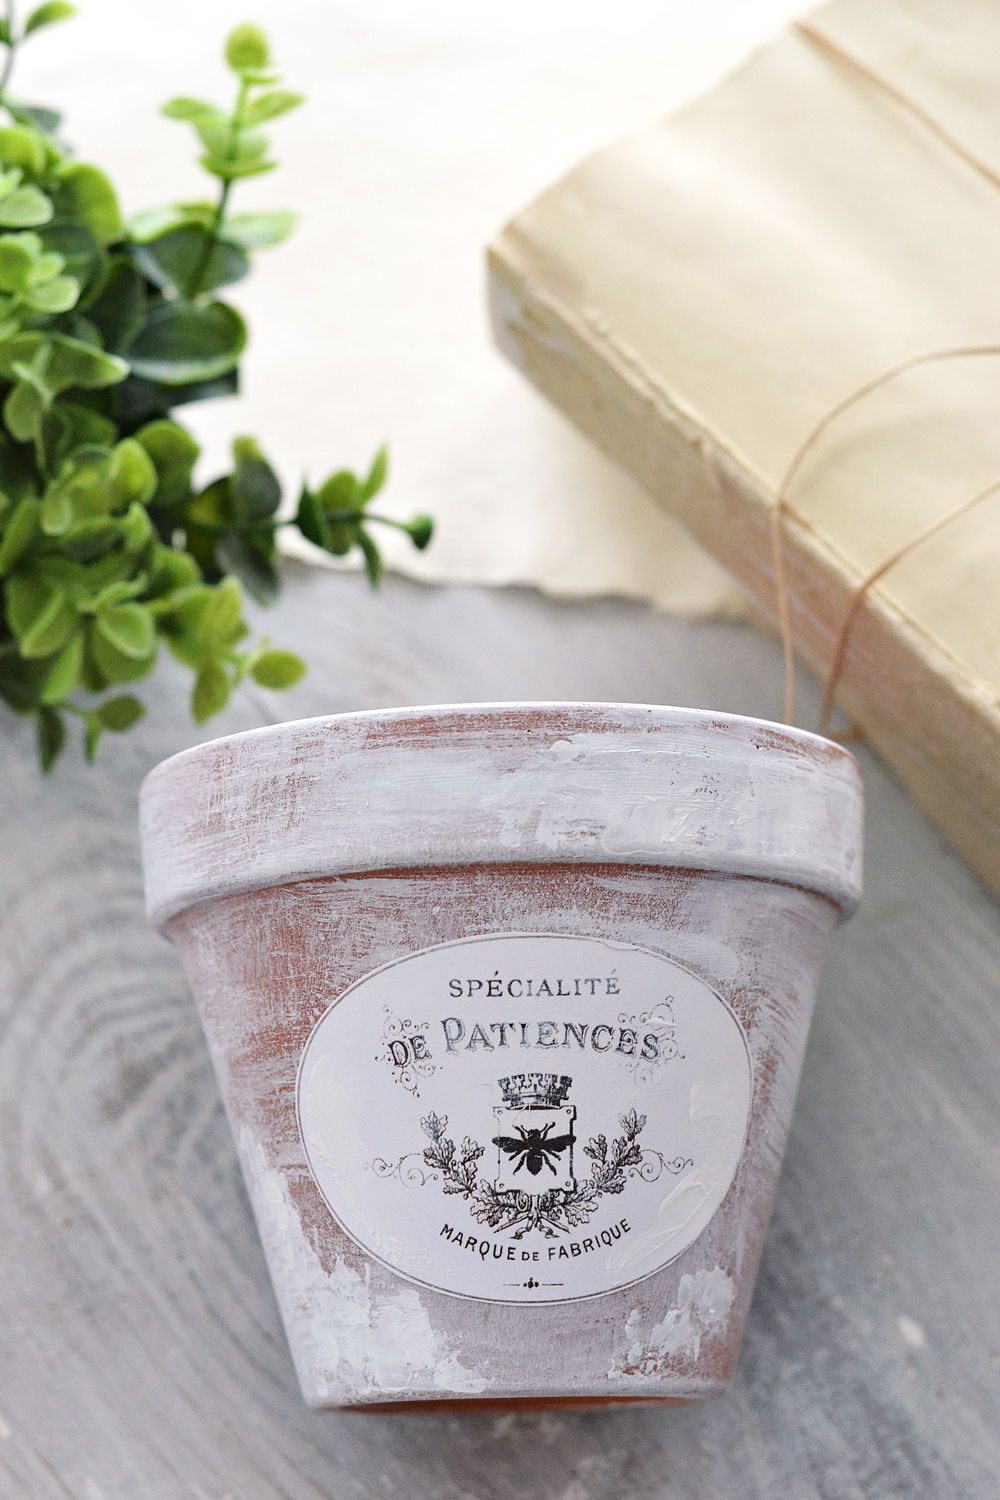 DIY Aged French Pots